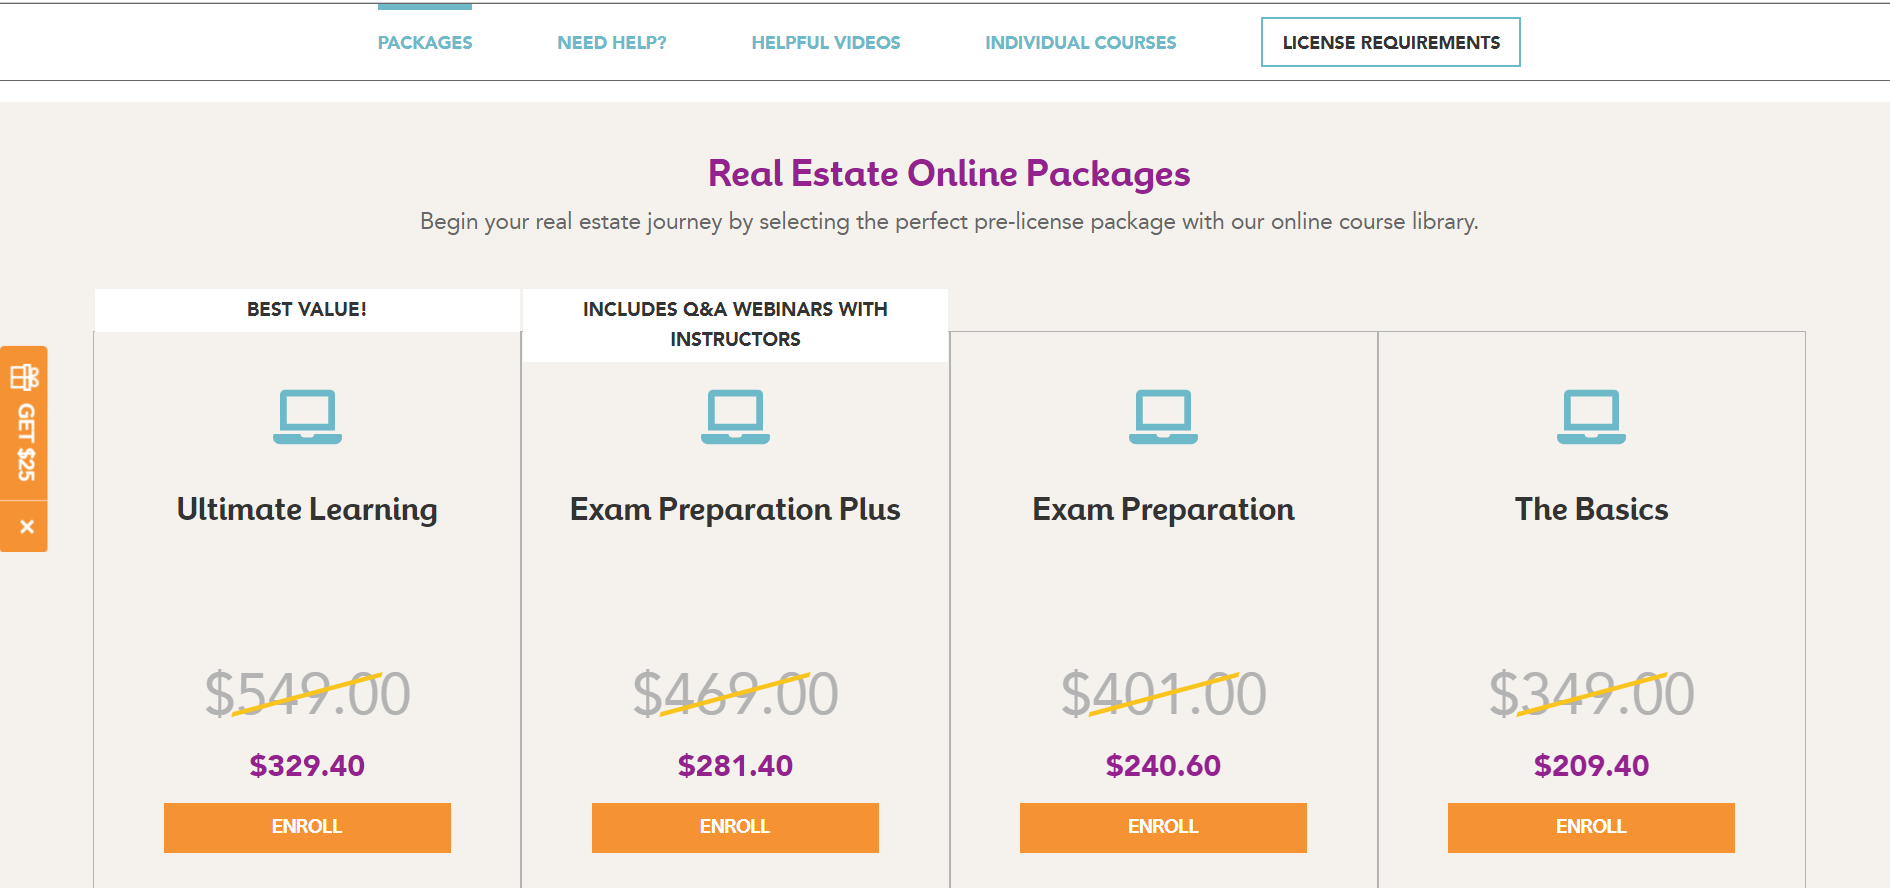 Advertisement for the Real Estate Online Packages course from RealEstateExpress.